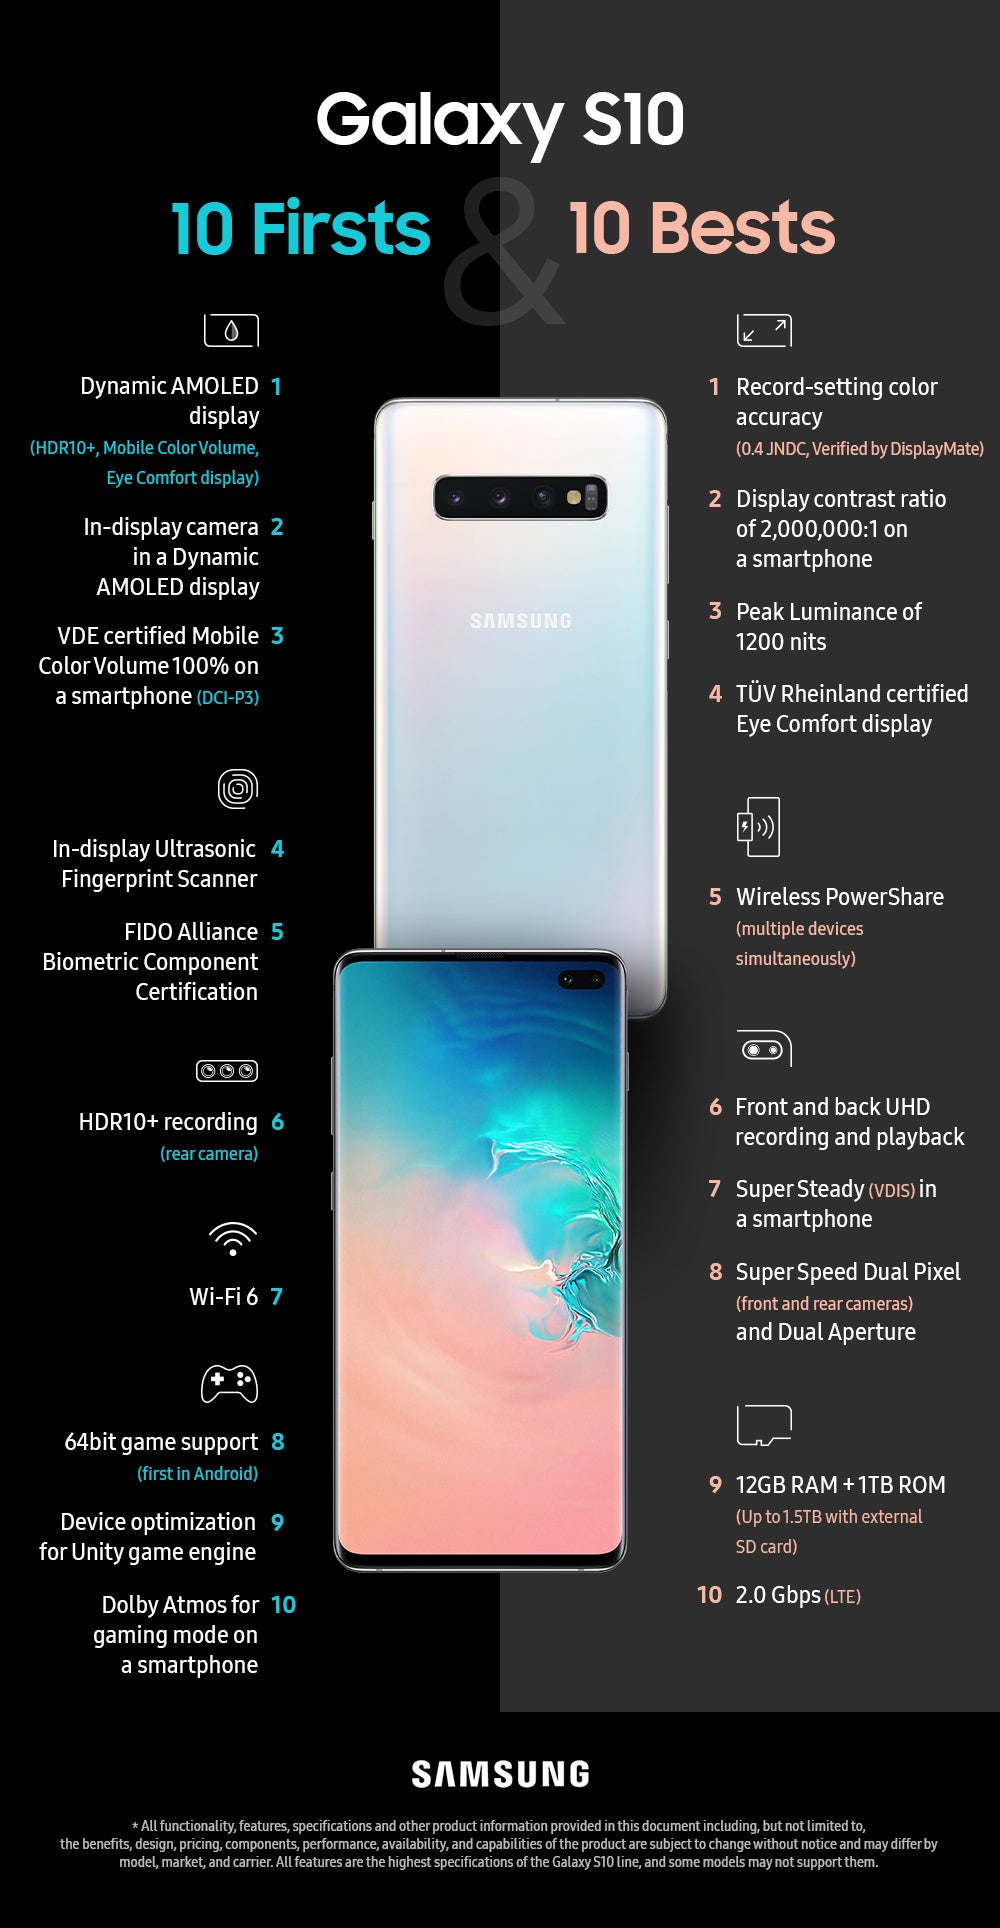 Samsung boasts Galaxy S10 achievements with infographic